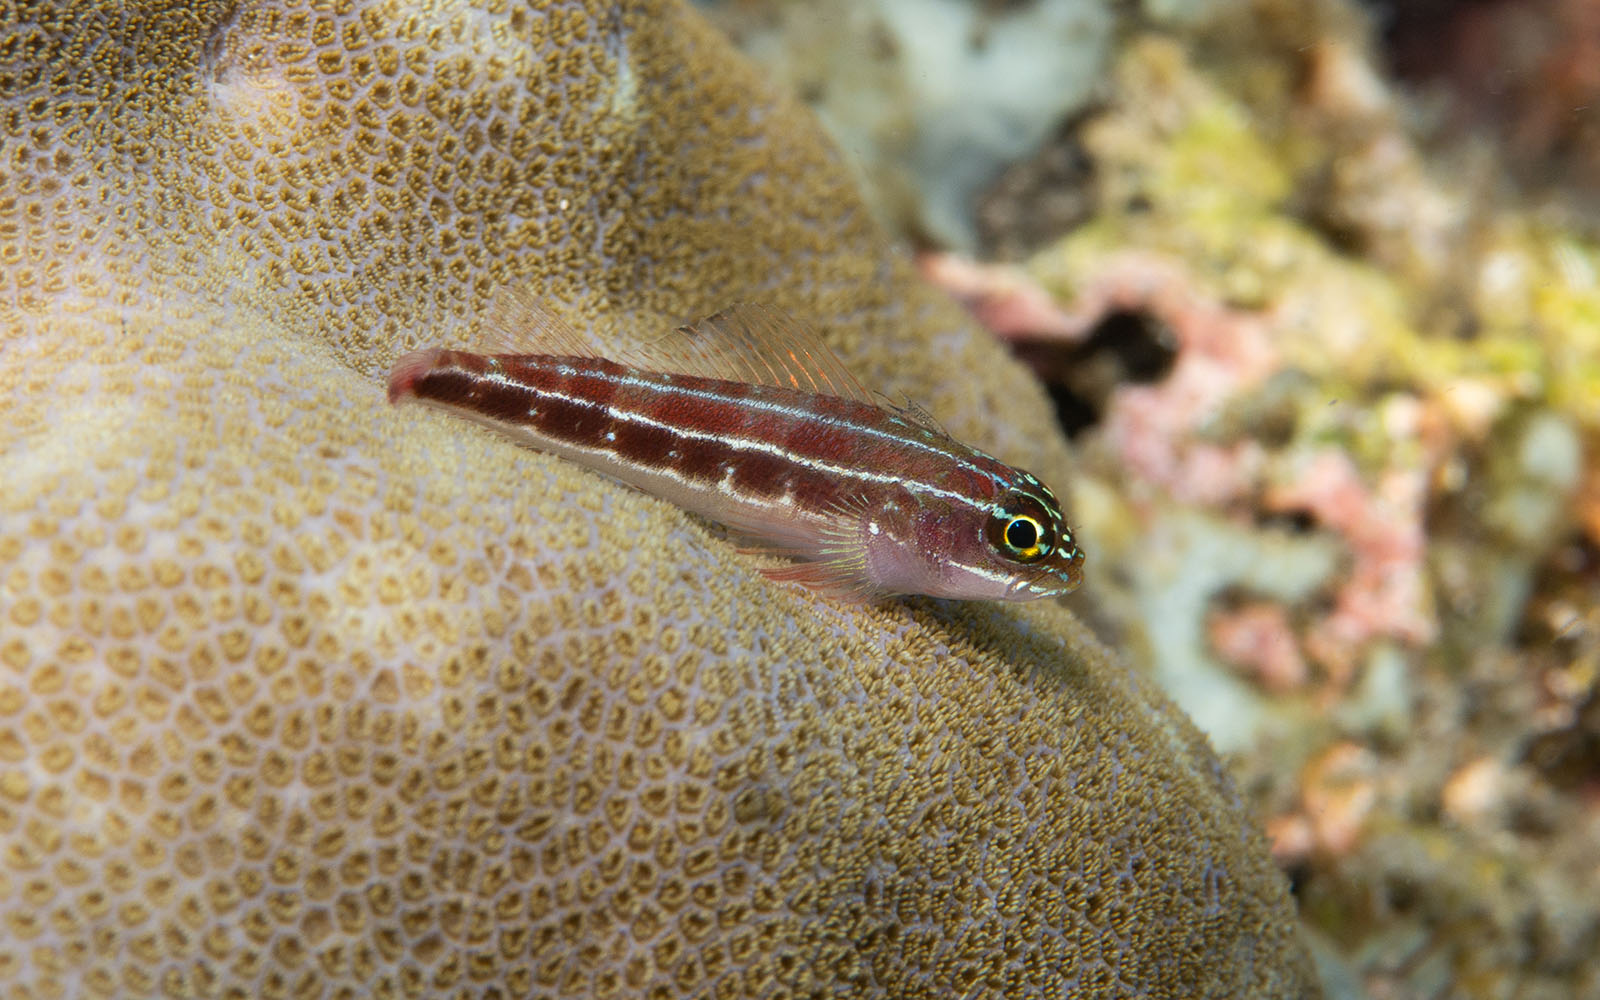 A striped blenny photographed by Snorkel Vacations on a snorkeling trip to Raja Ampat